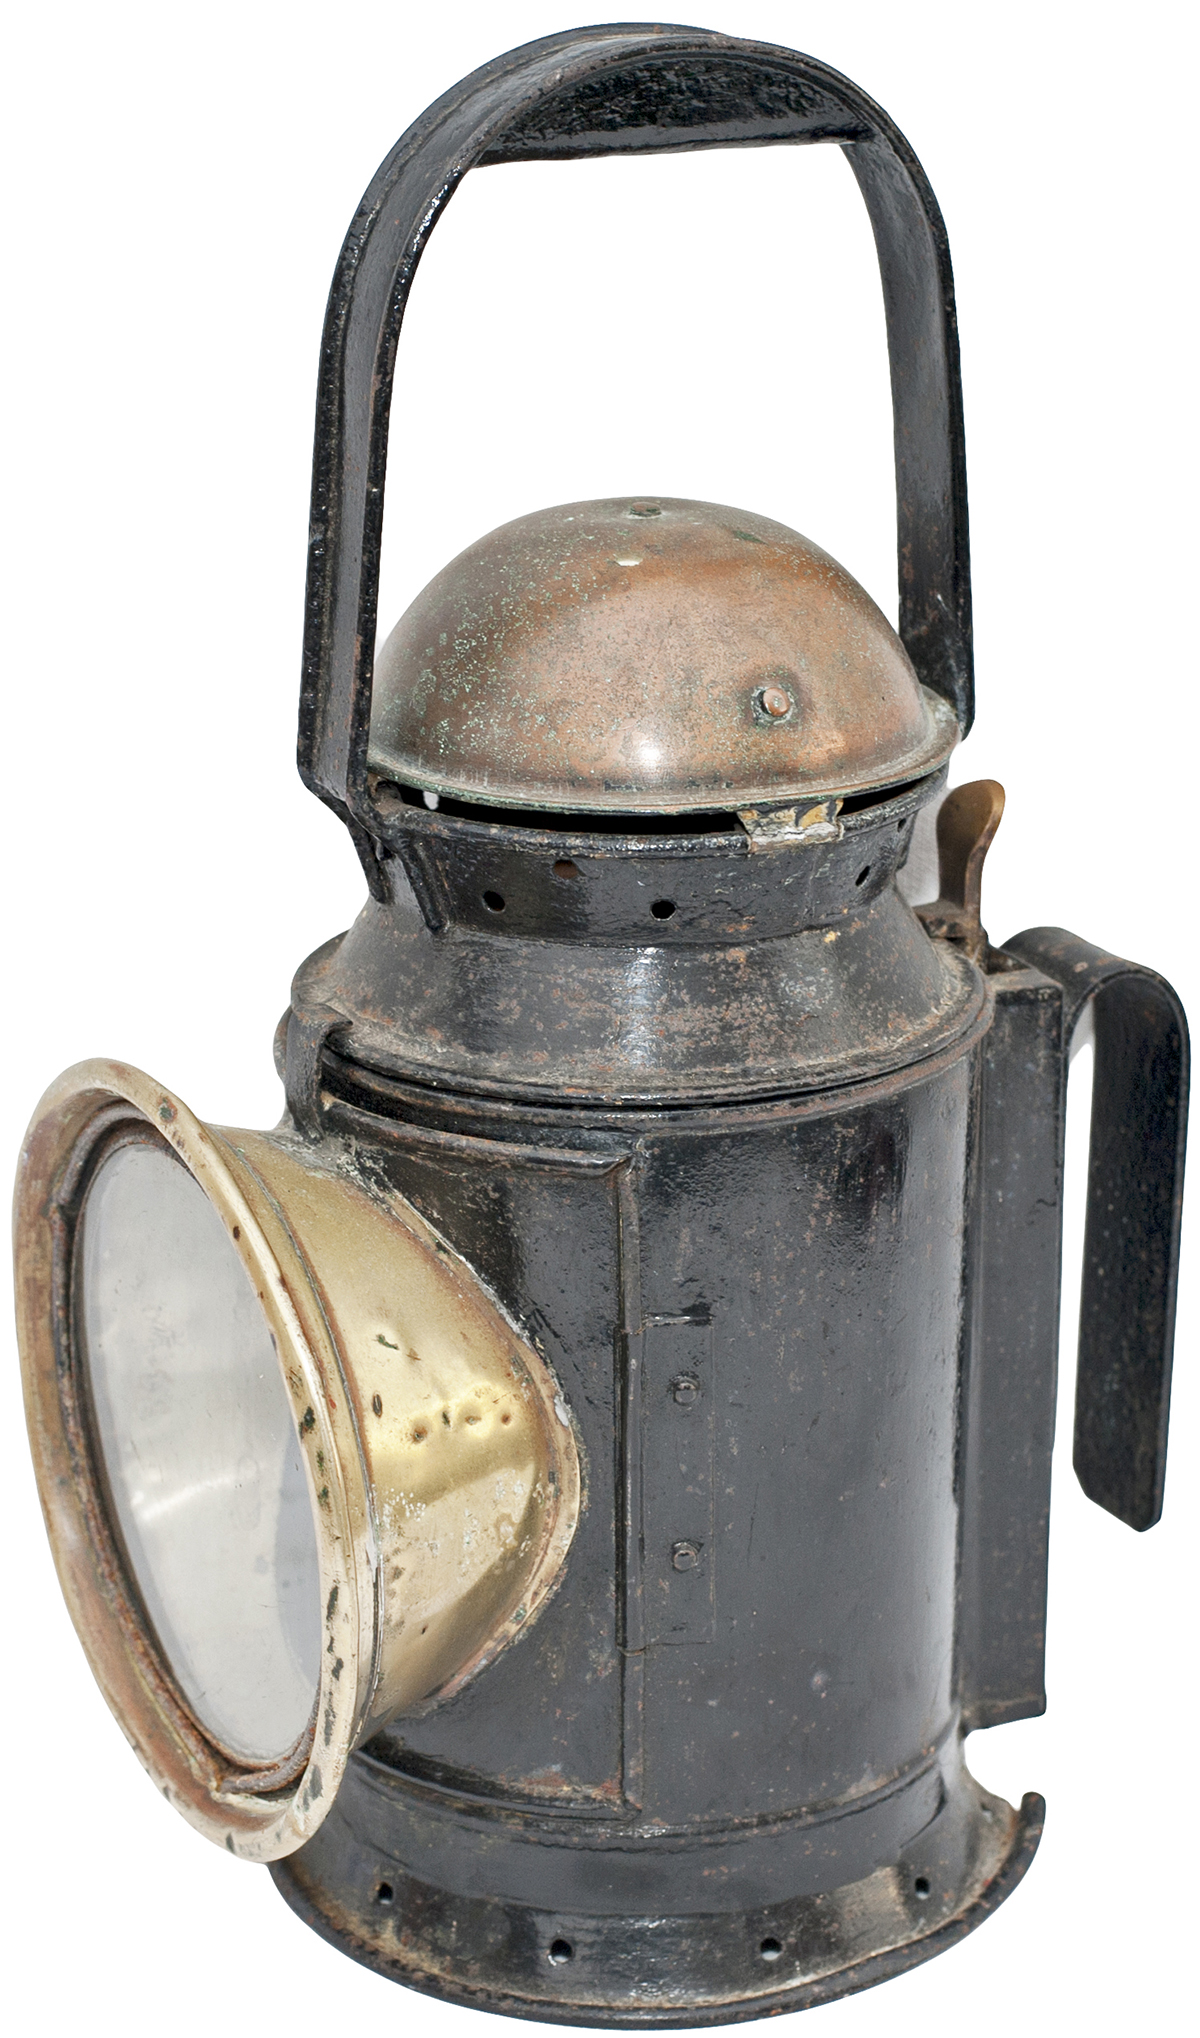 Central London Railway 3 Aspect coppertop handlamp, complete with original copper reservoir and